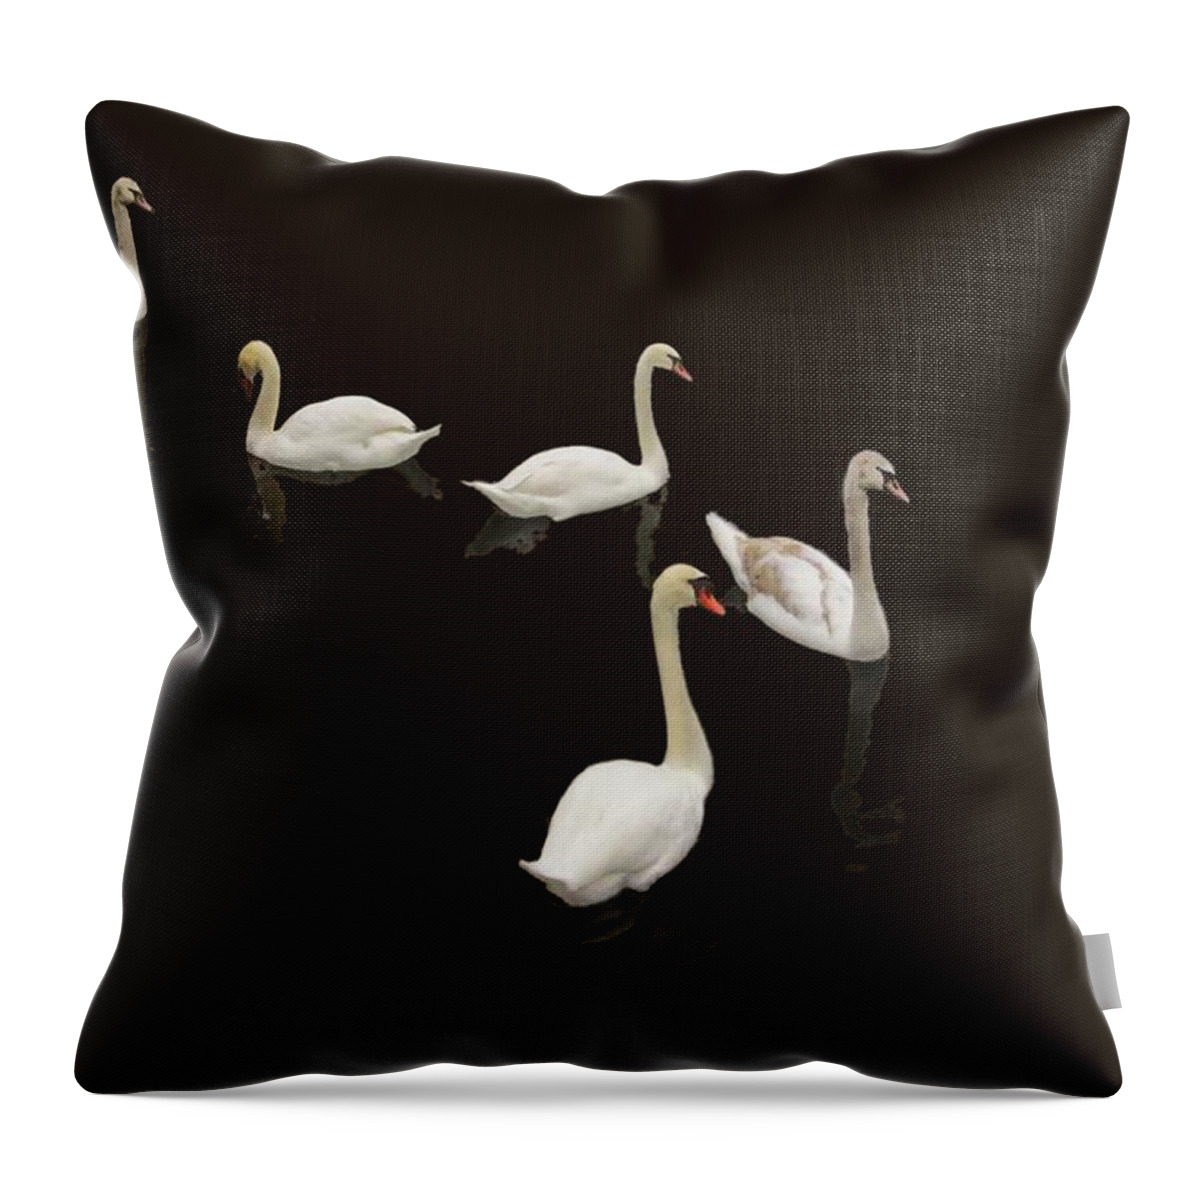 Background Black Throw Pillow featuring the photograph Swan Family On Black by Constantine Gregory